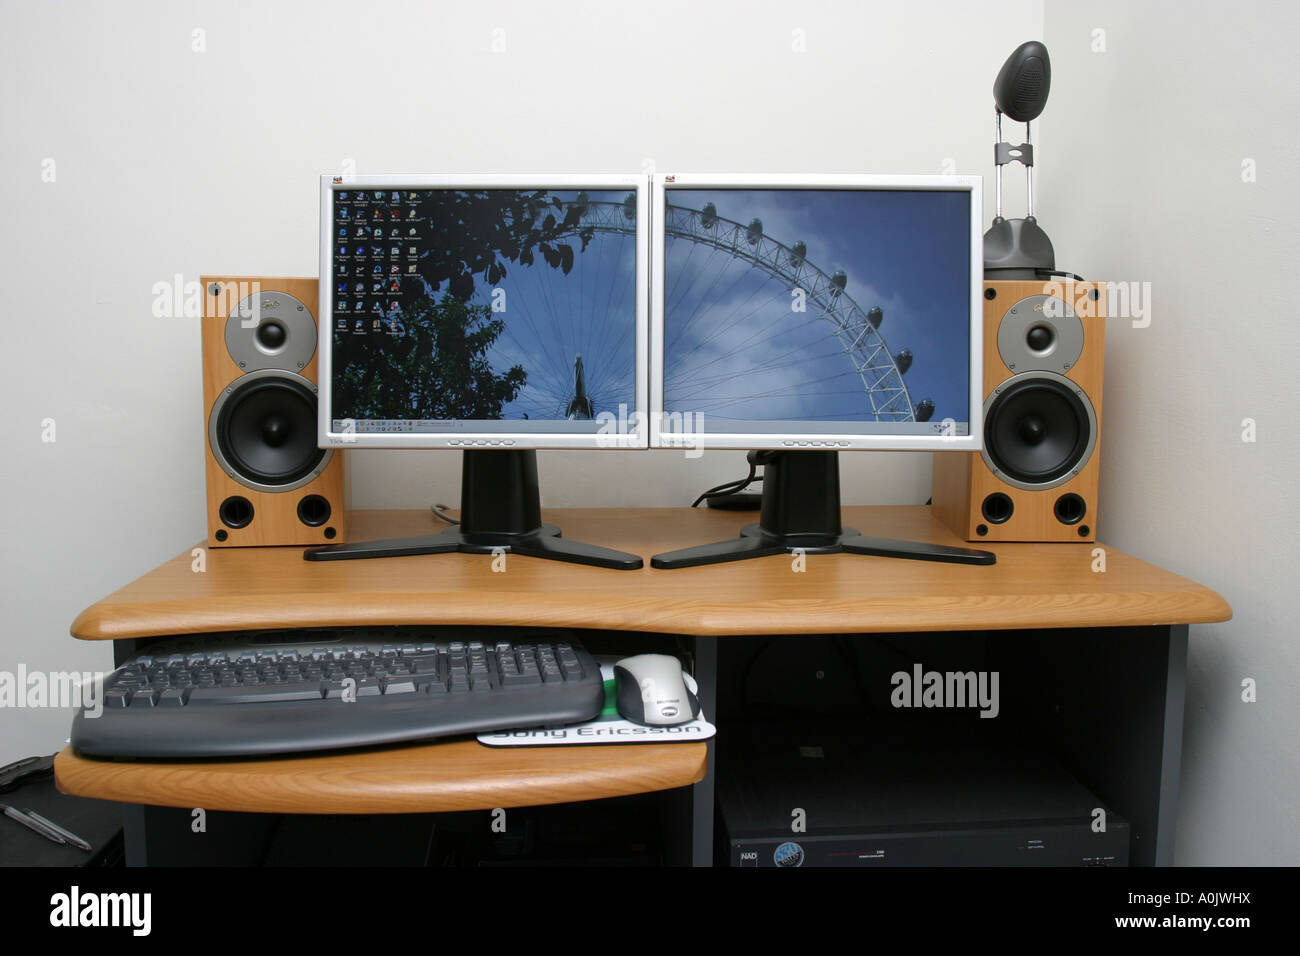 Modern Pc On Desk With Speakers And Dual Flatscreen Monitors Stock